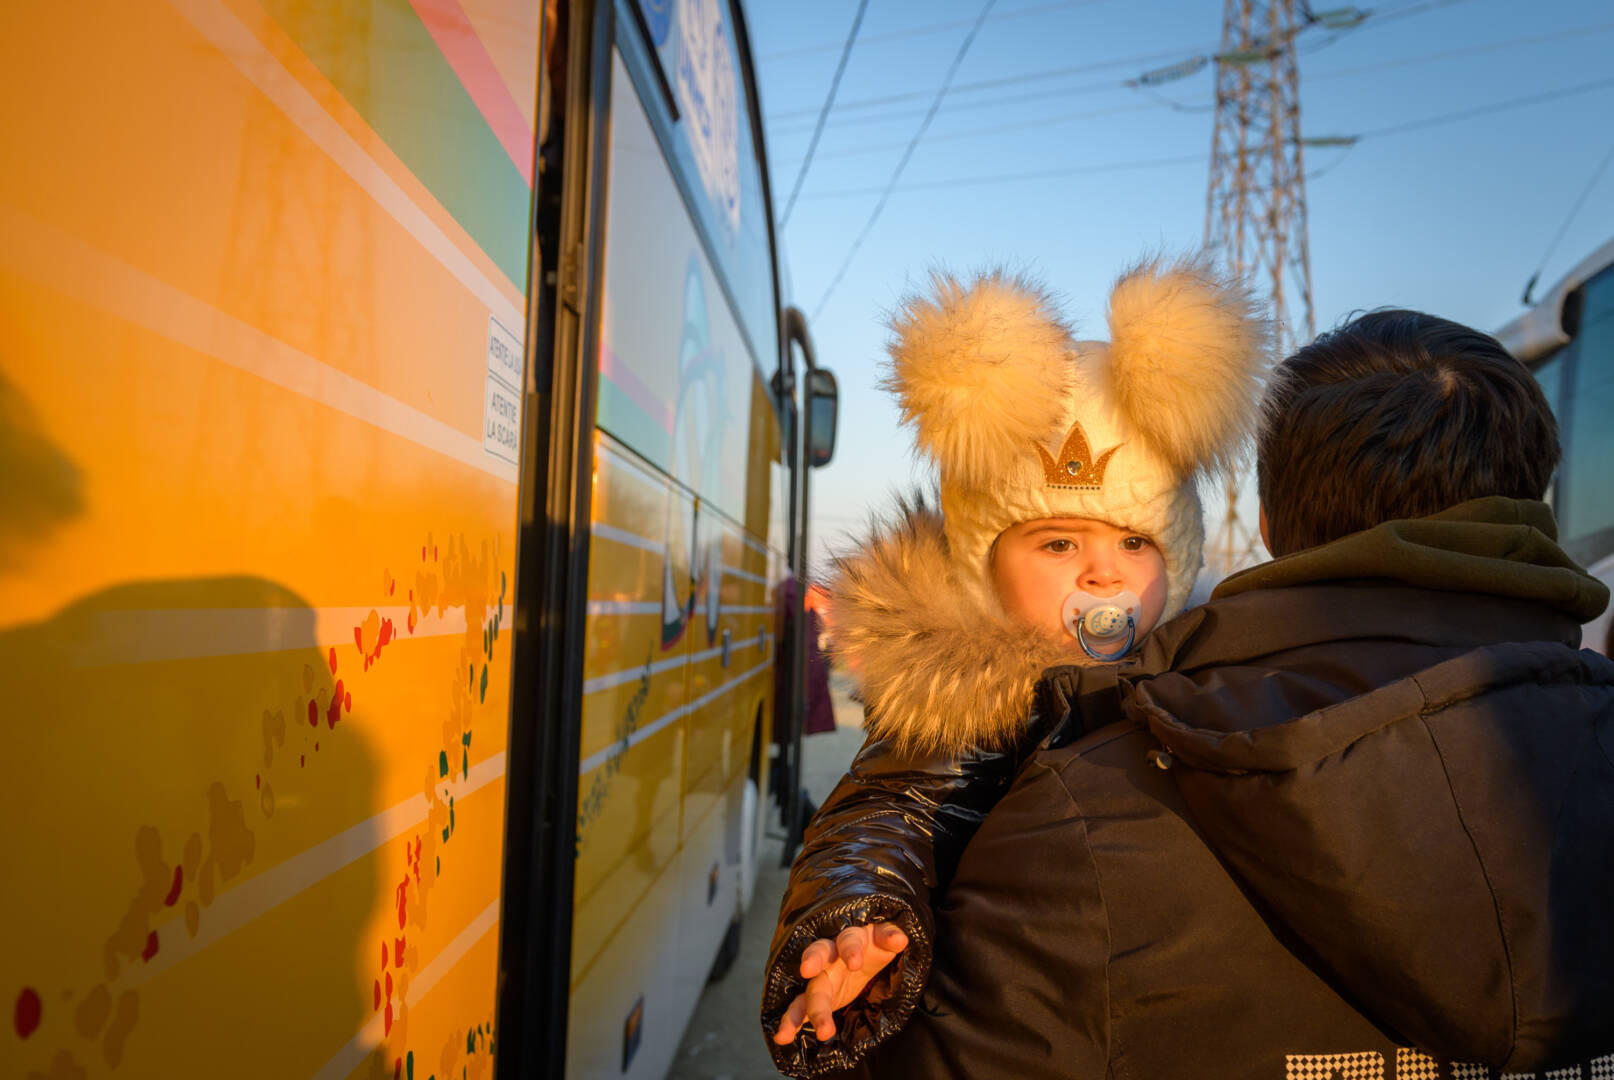 A child bundled against the cold is carried by an adult onto a bus, which is taking them away from the war in Ukraine.